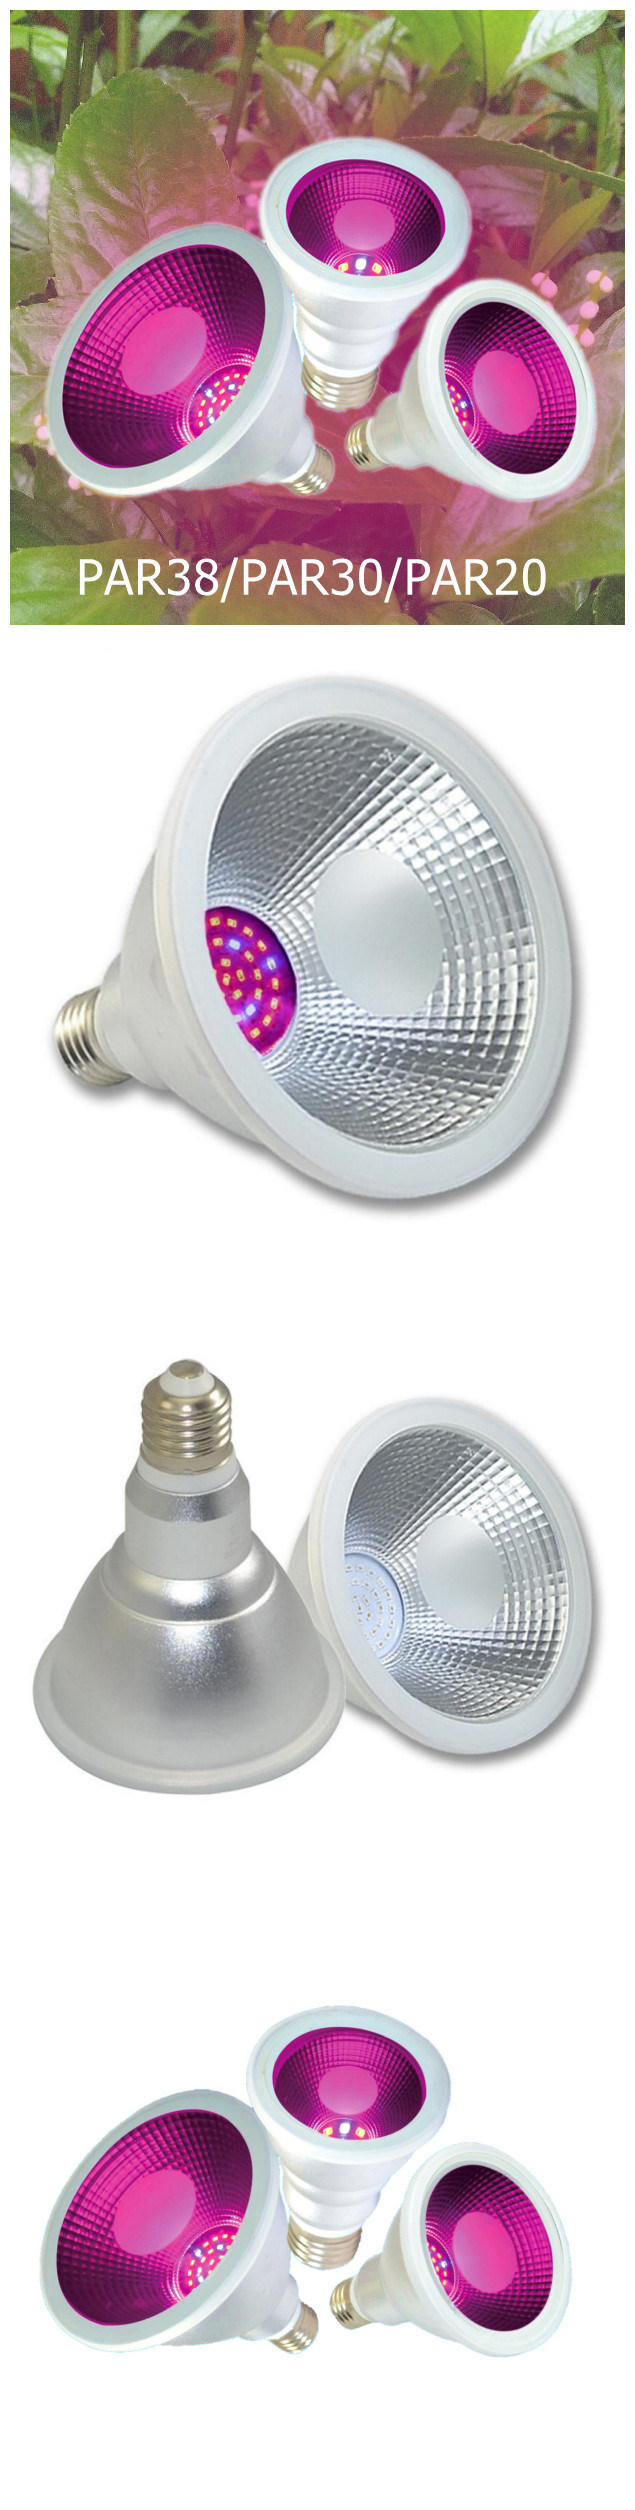 Newest LED Grow Light PAR38 15W E26 E27 for Home Organic Bulb Red Blue New Style for All Kinds of Plants